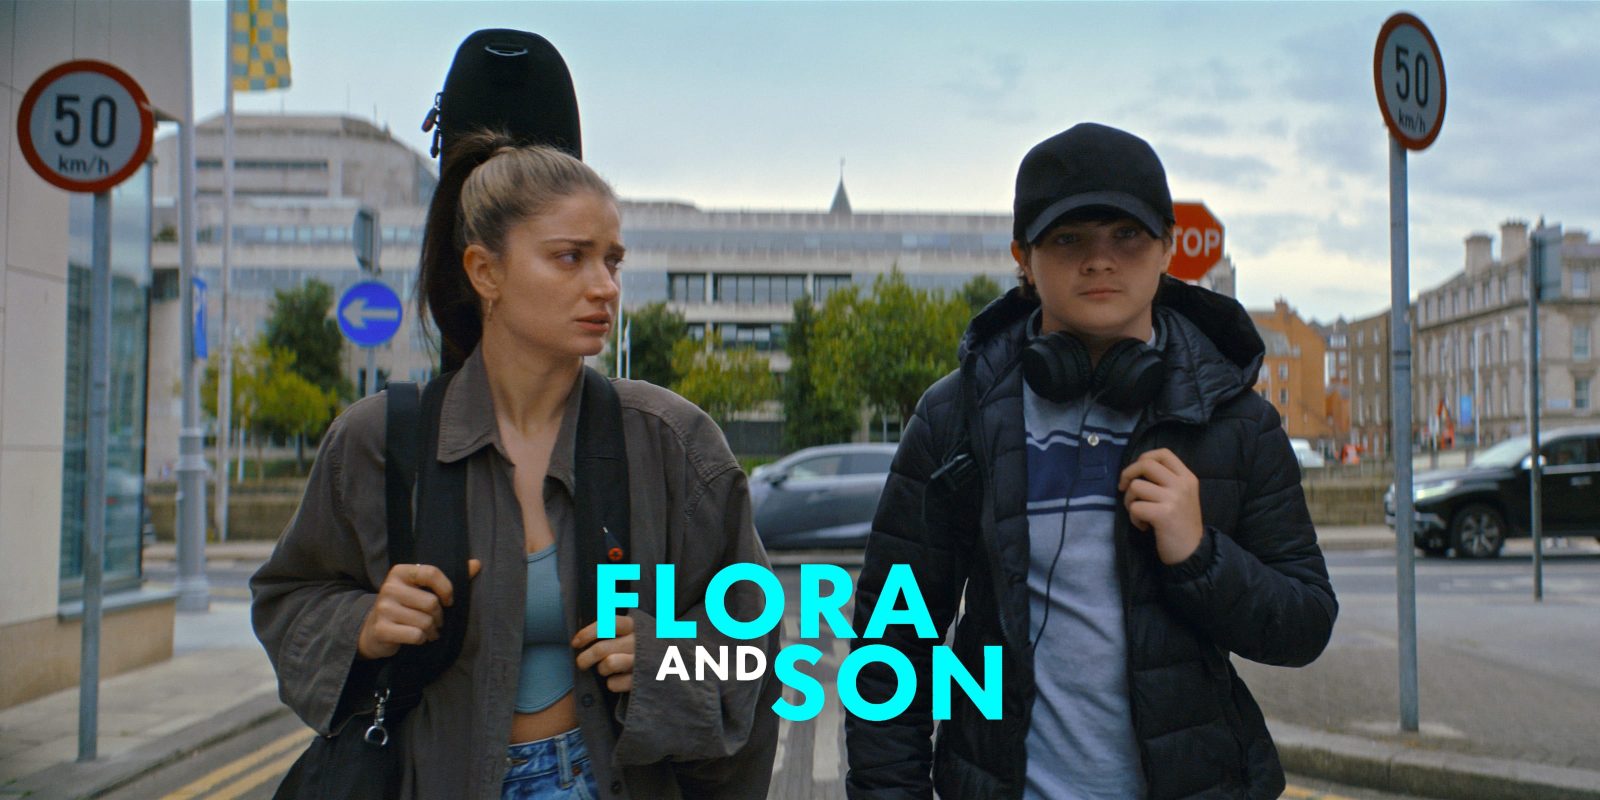 New film from John Carney ‘Flora and Son’ now streaming on Apple TV+